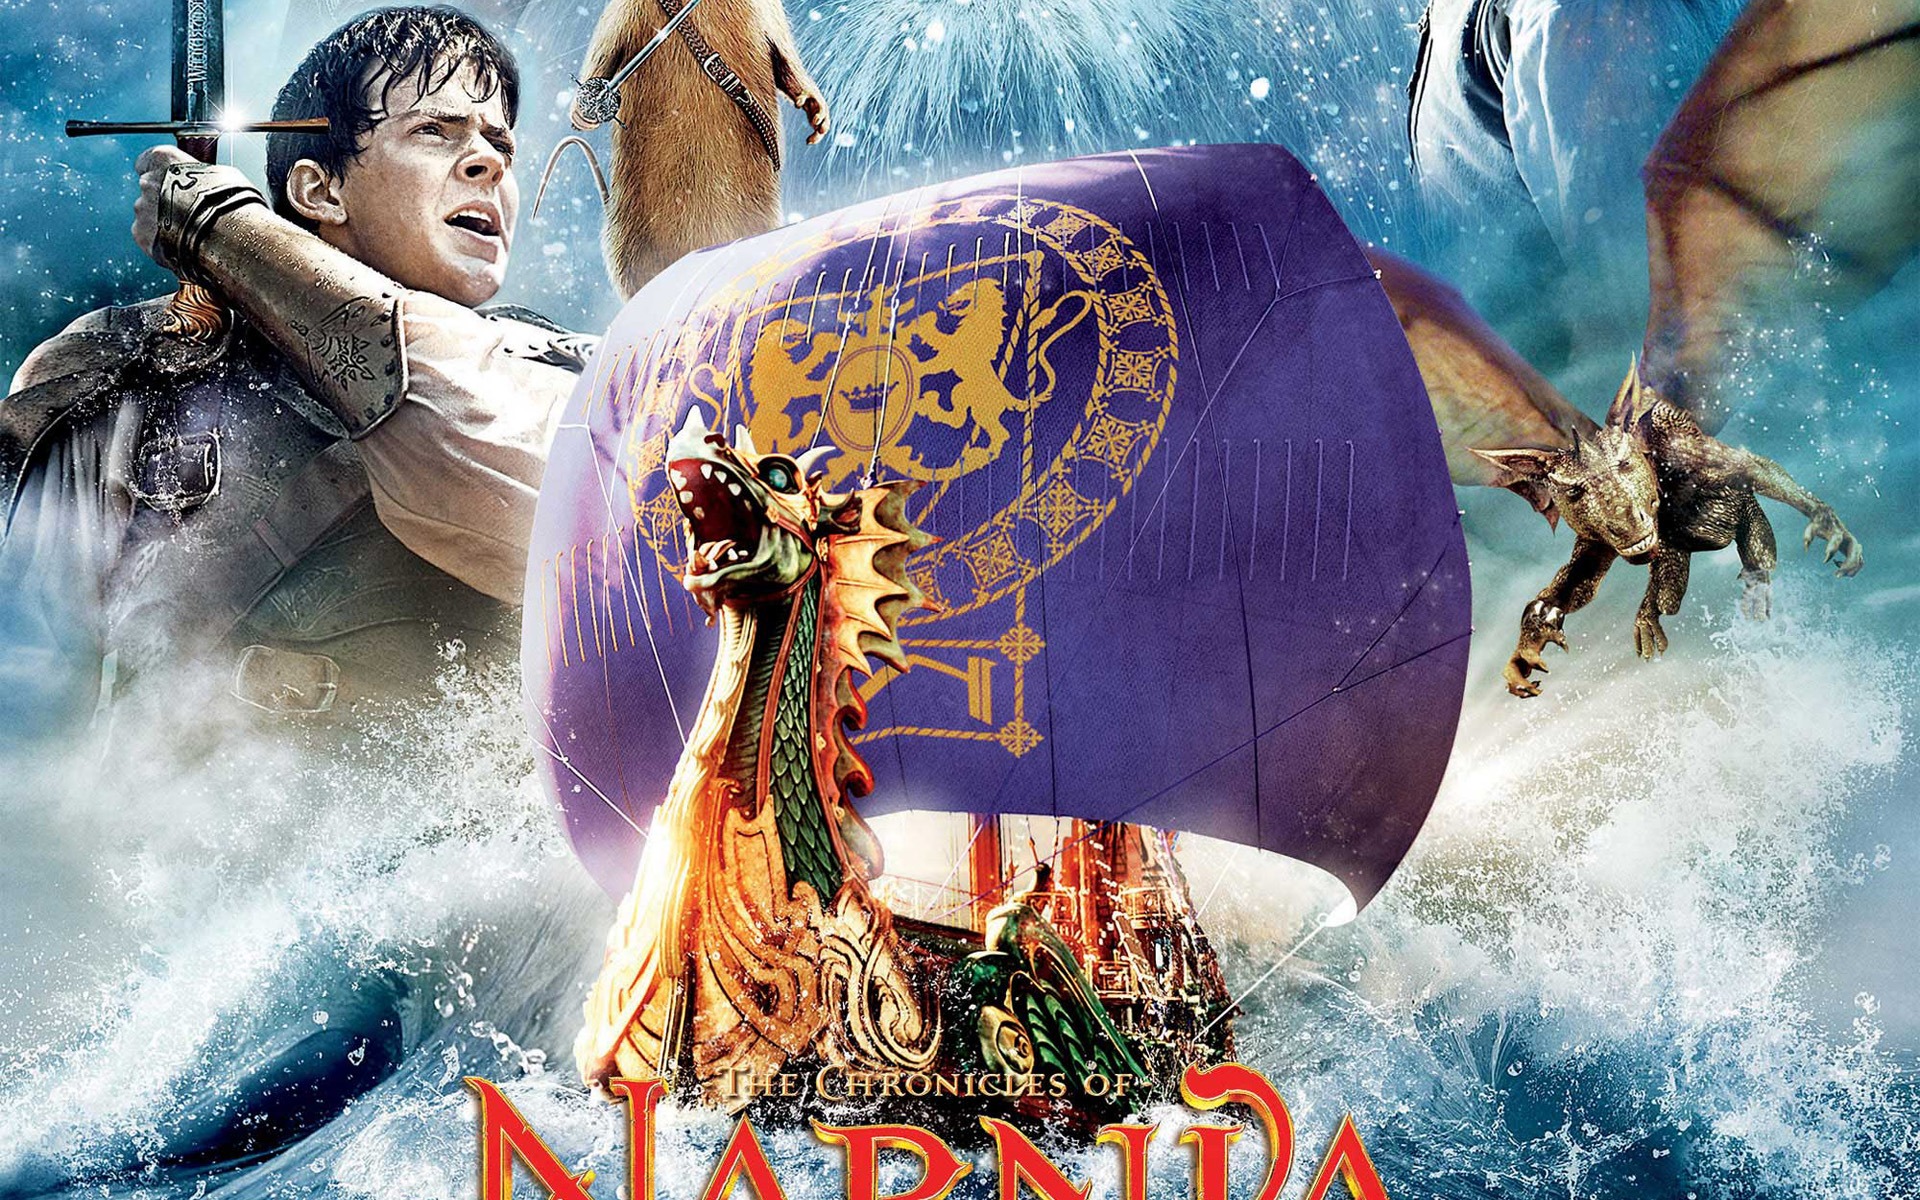 The Chronicles of Narnia: The Voyage of the fonds d'écran Passeur d'Aurore #1 - 1920x1200